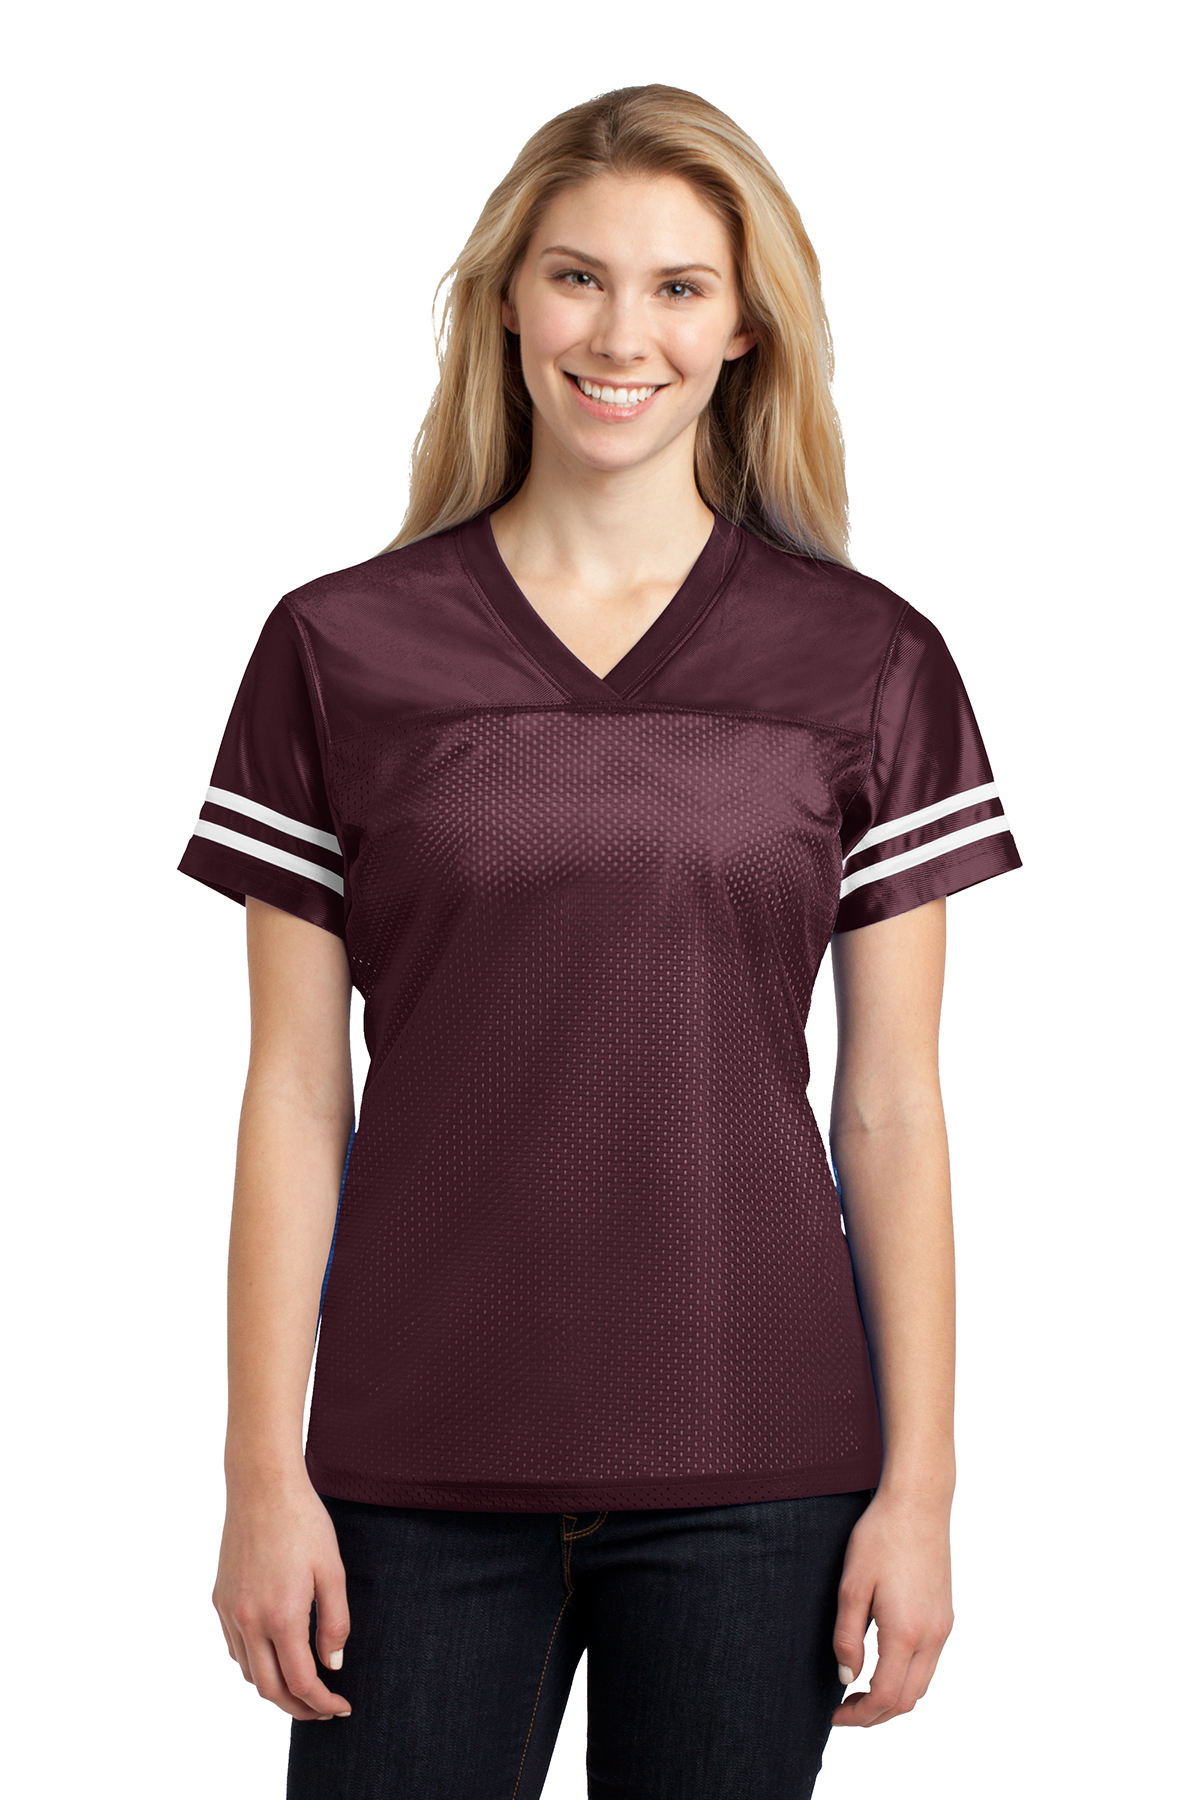 click to view Maroon/White